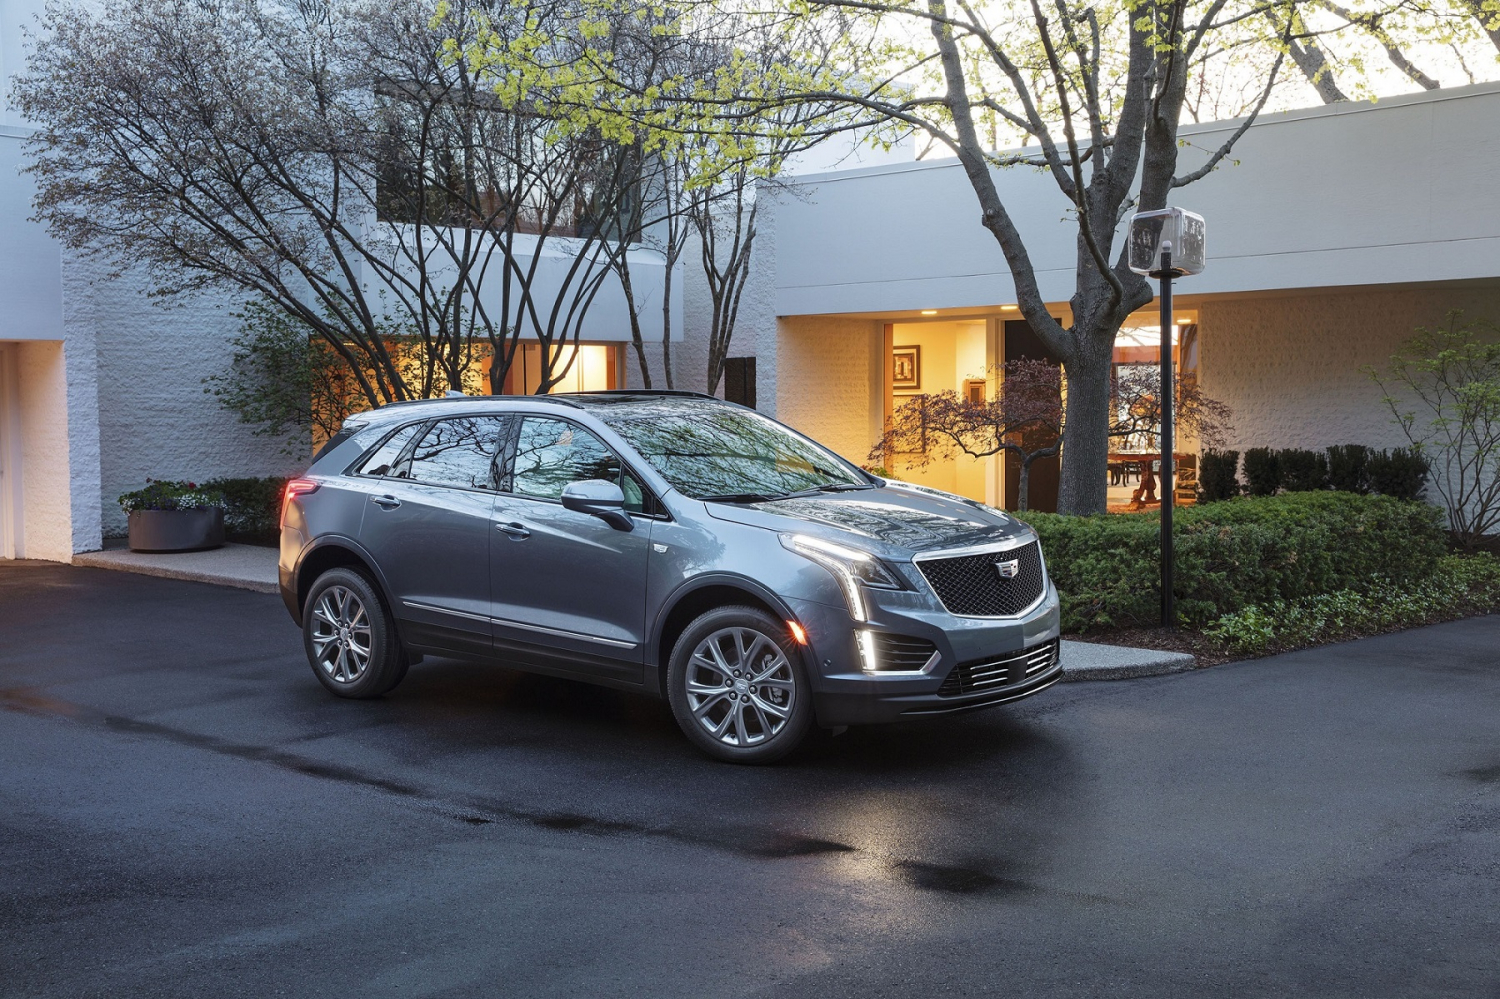 2020 Cadillac XT5 Sport, Mercedes-AMG GLC43 Offer Two Visions Of Luxury  Crossovers